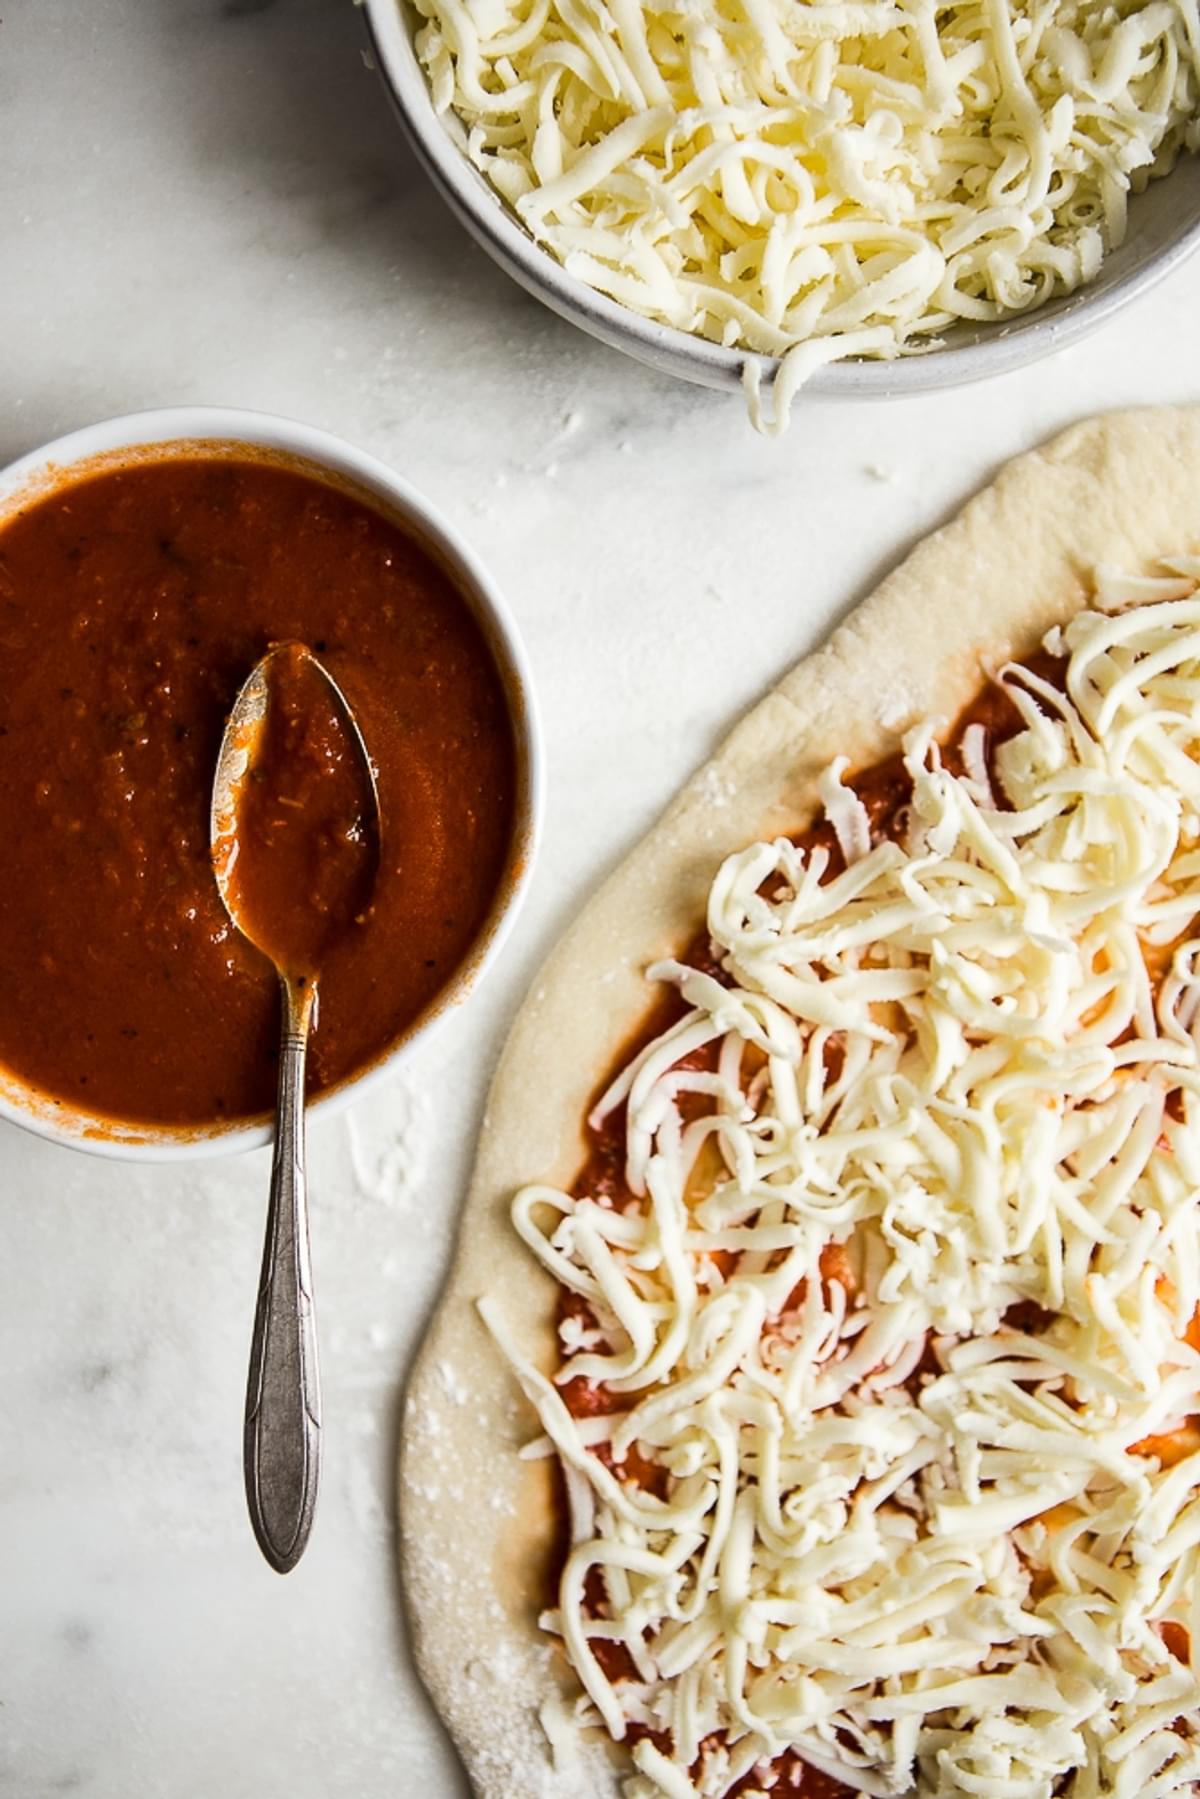 pizza crust with sauce and shredded mozzarella cheese